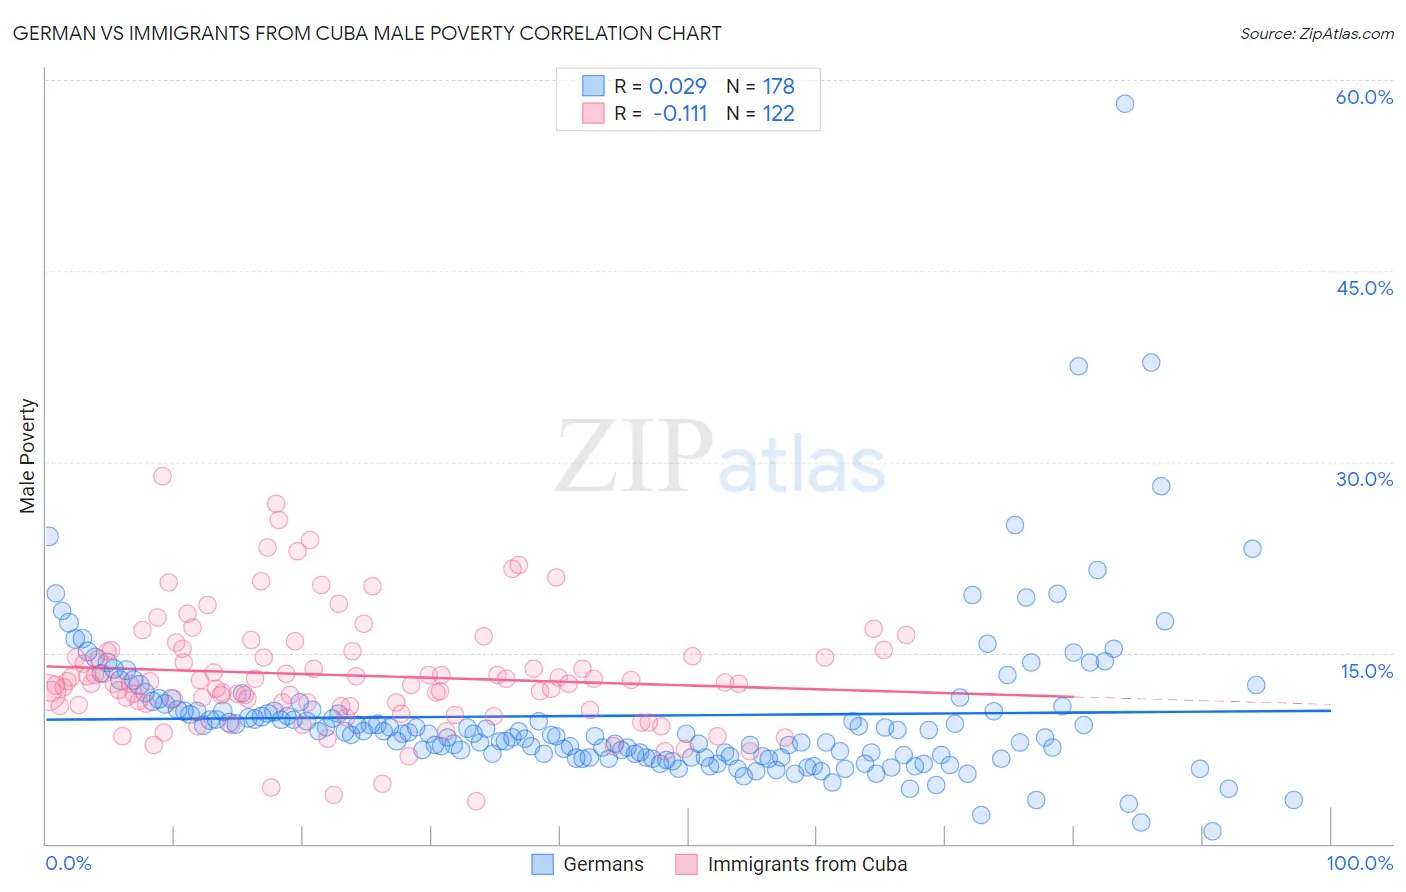 German vs Immigrants from Cuba Male Poverty